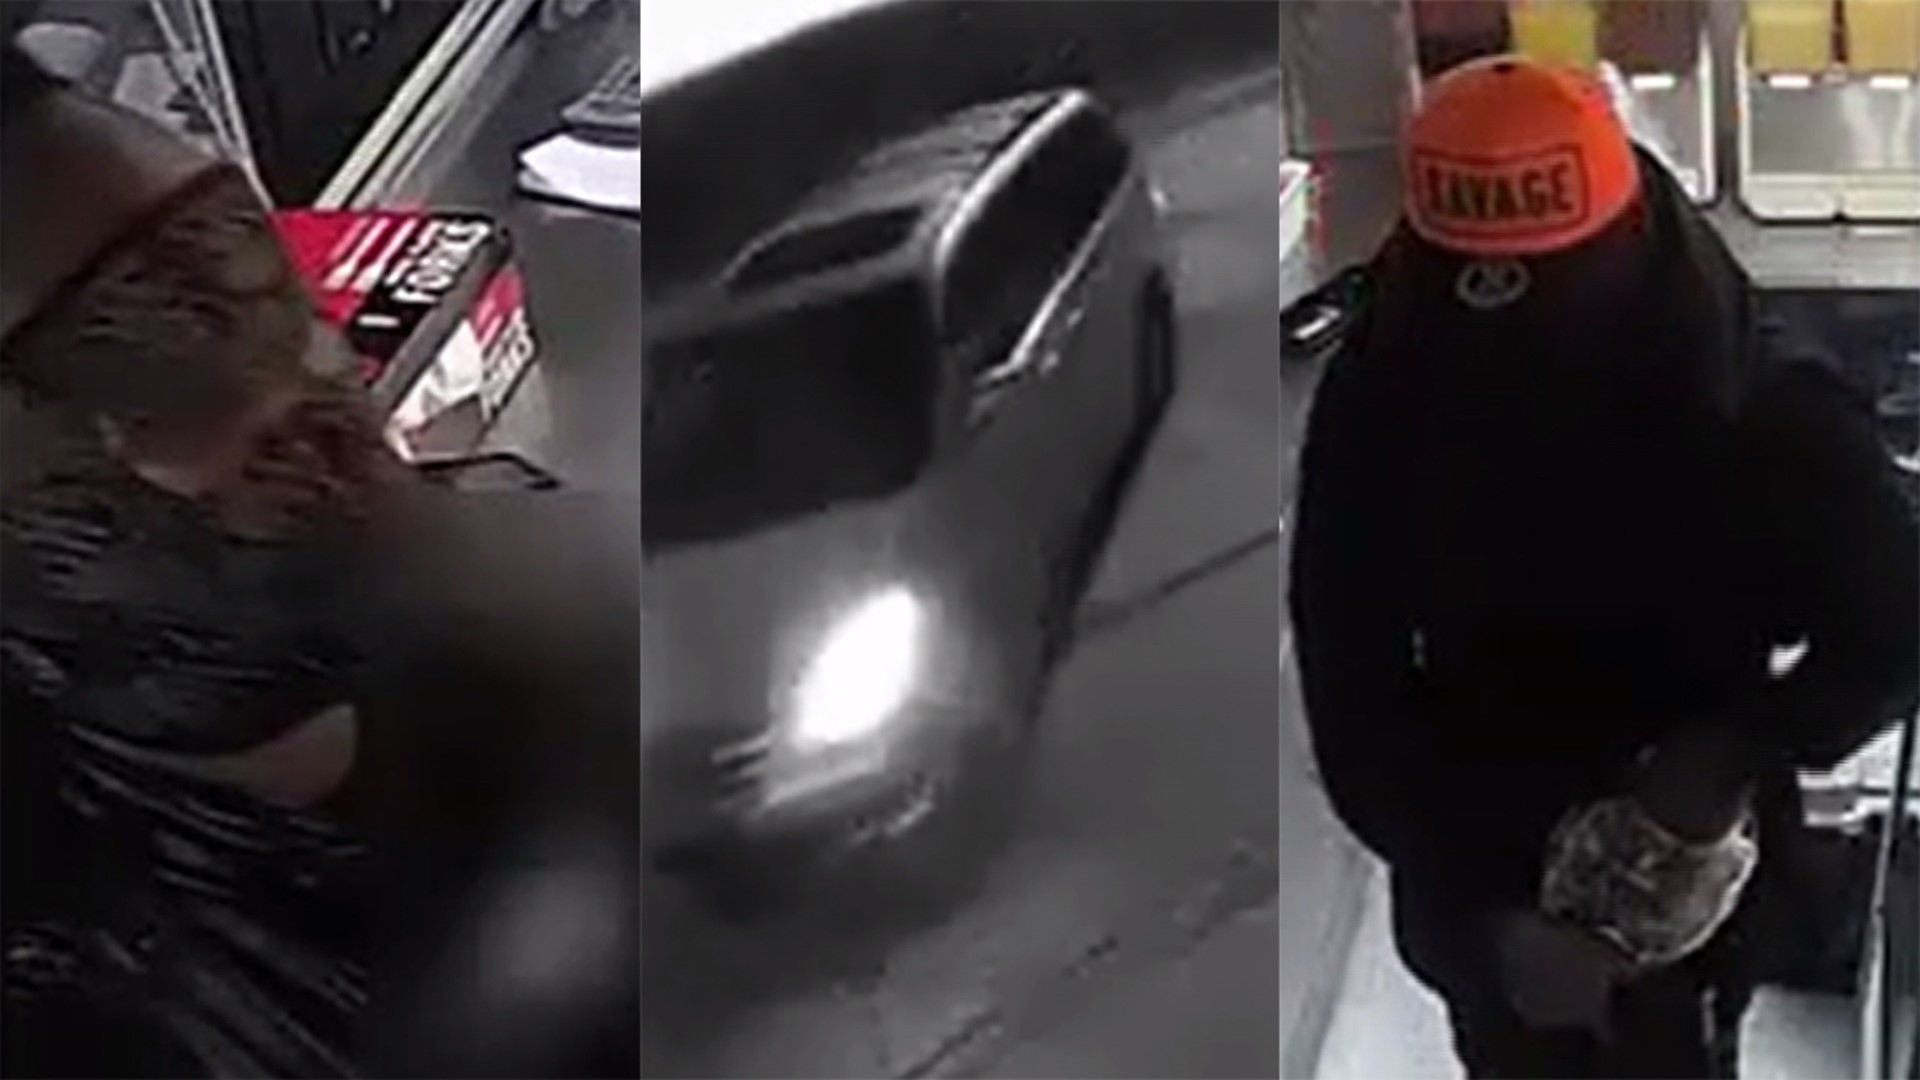 Houston police released new surveillance video of armed robbers responsible for at least 3 violent robberies this month.